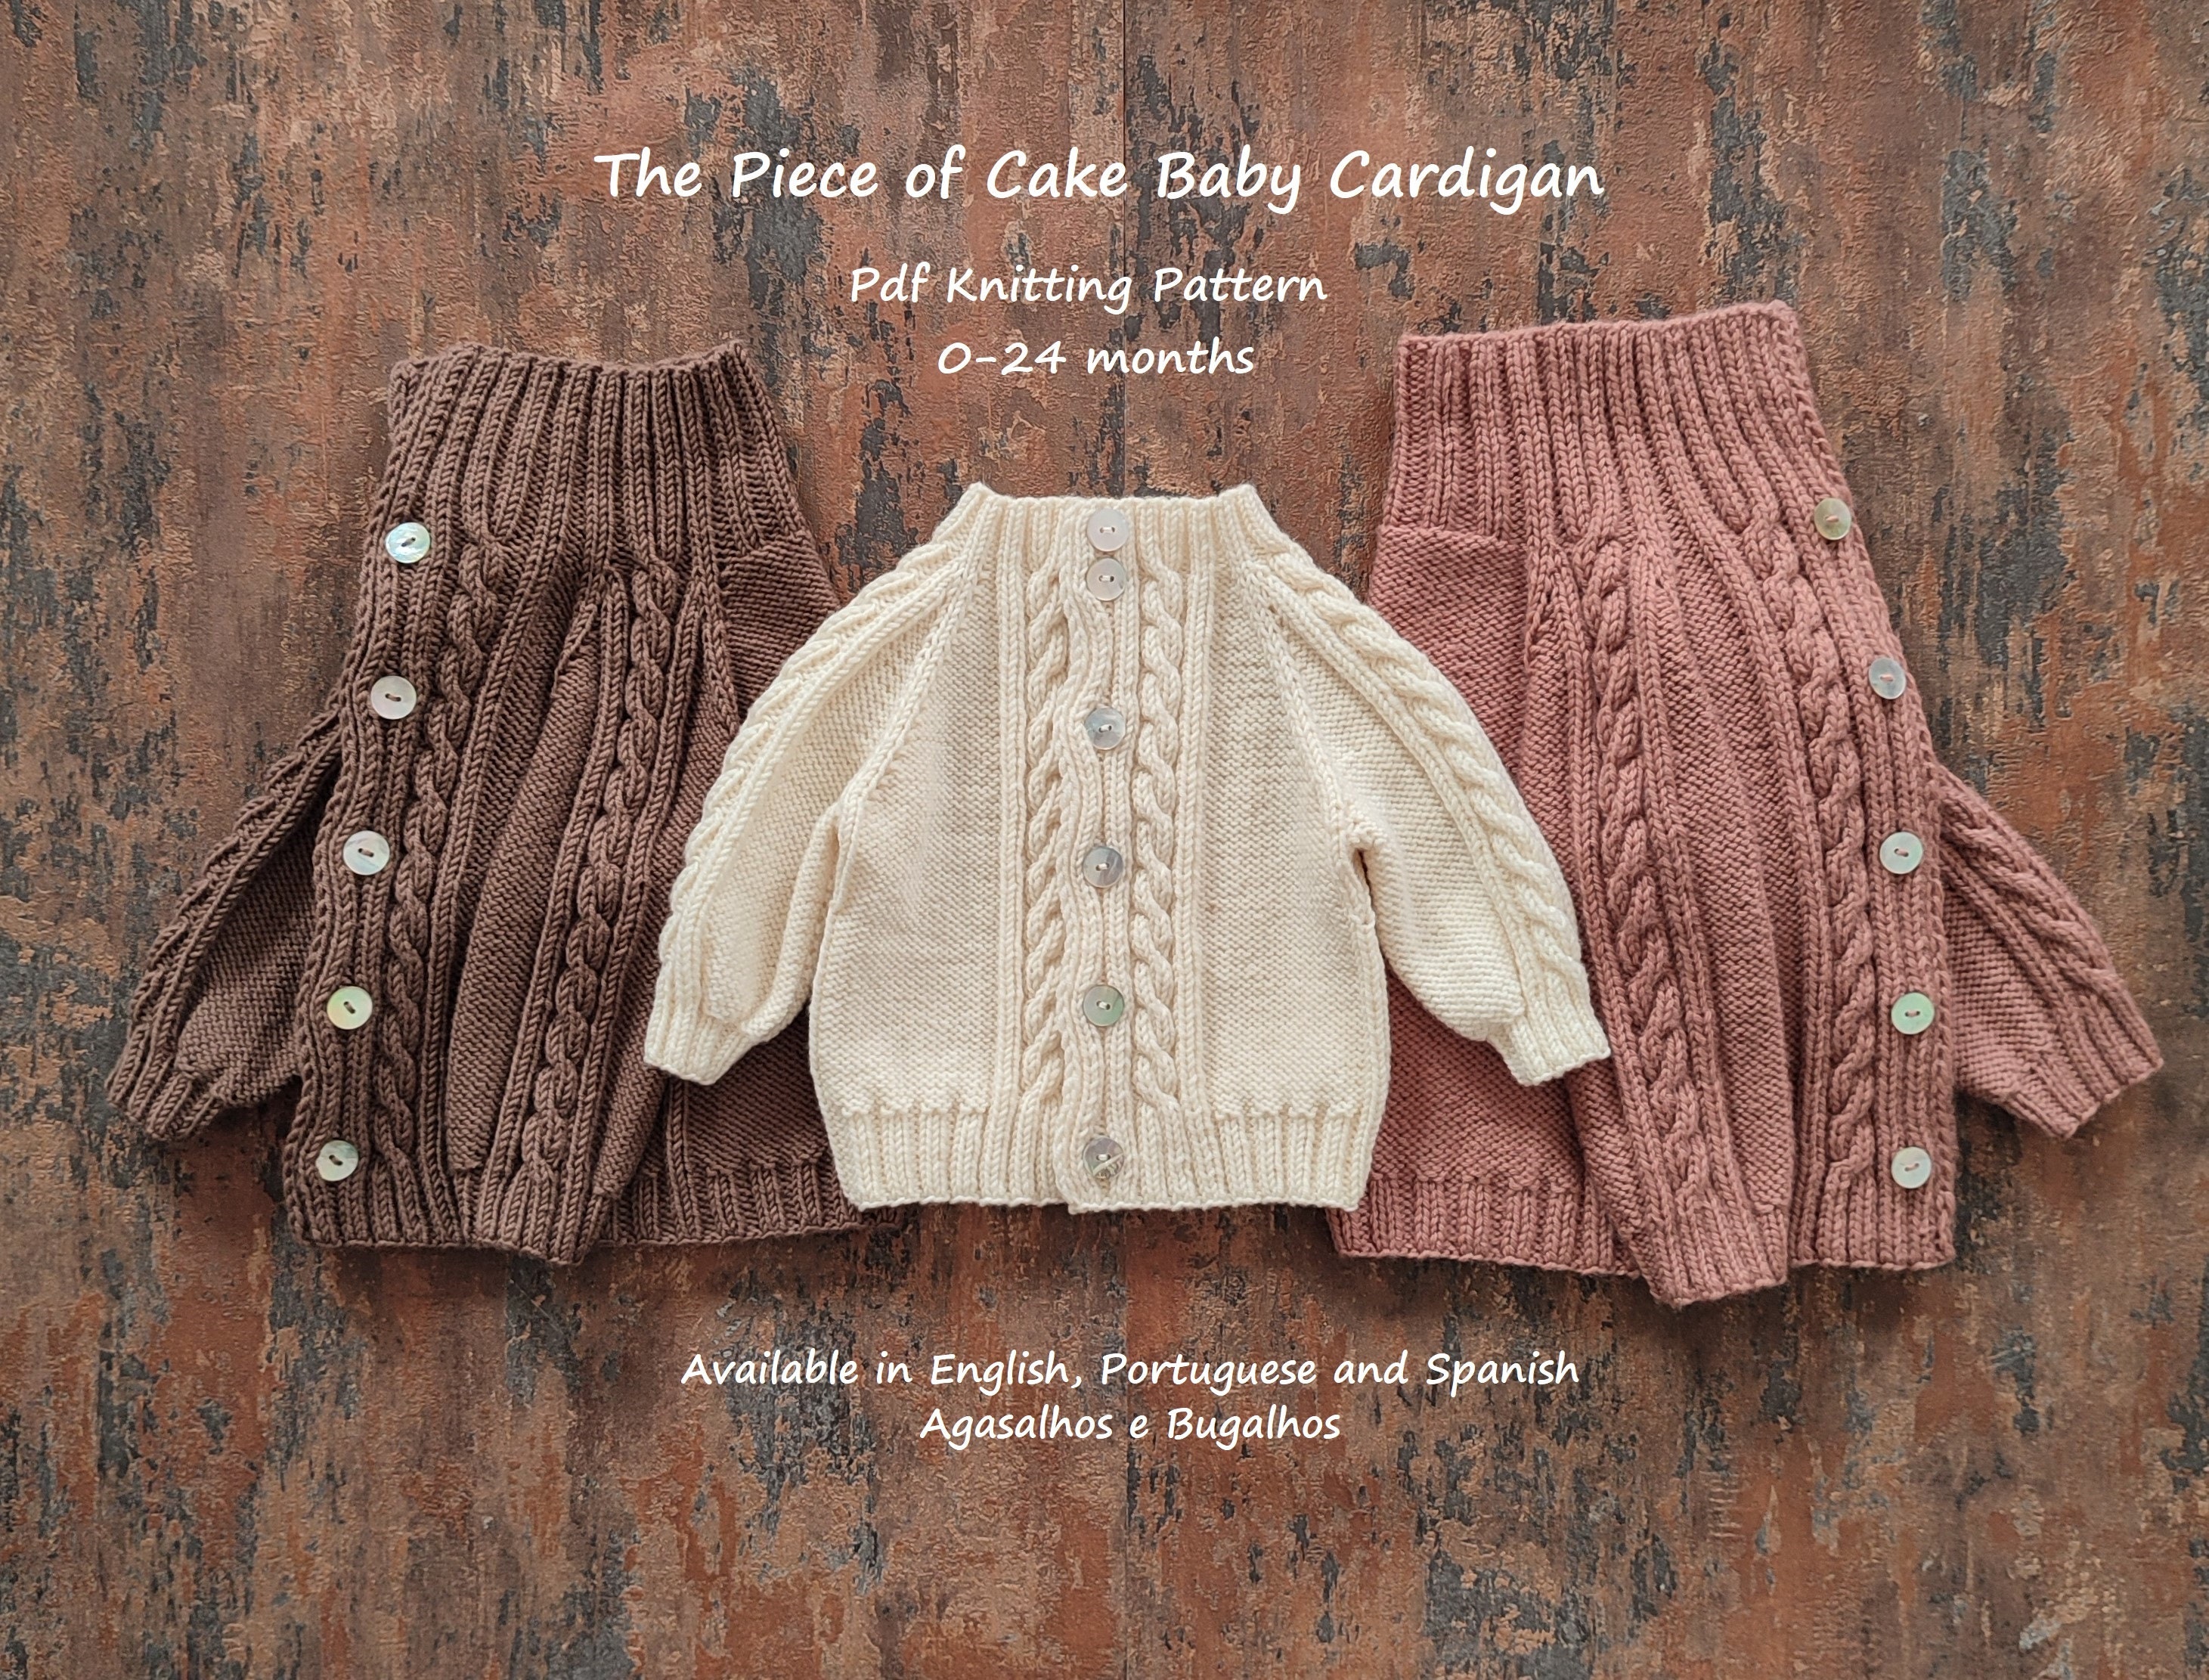 Latte Cake Throw With Fringe knit Pattern Only Perfect for